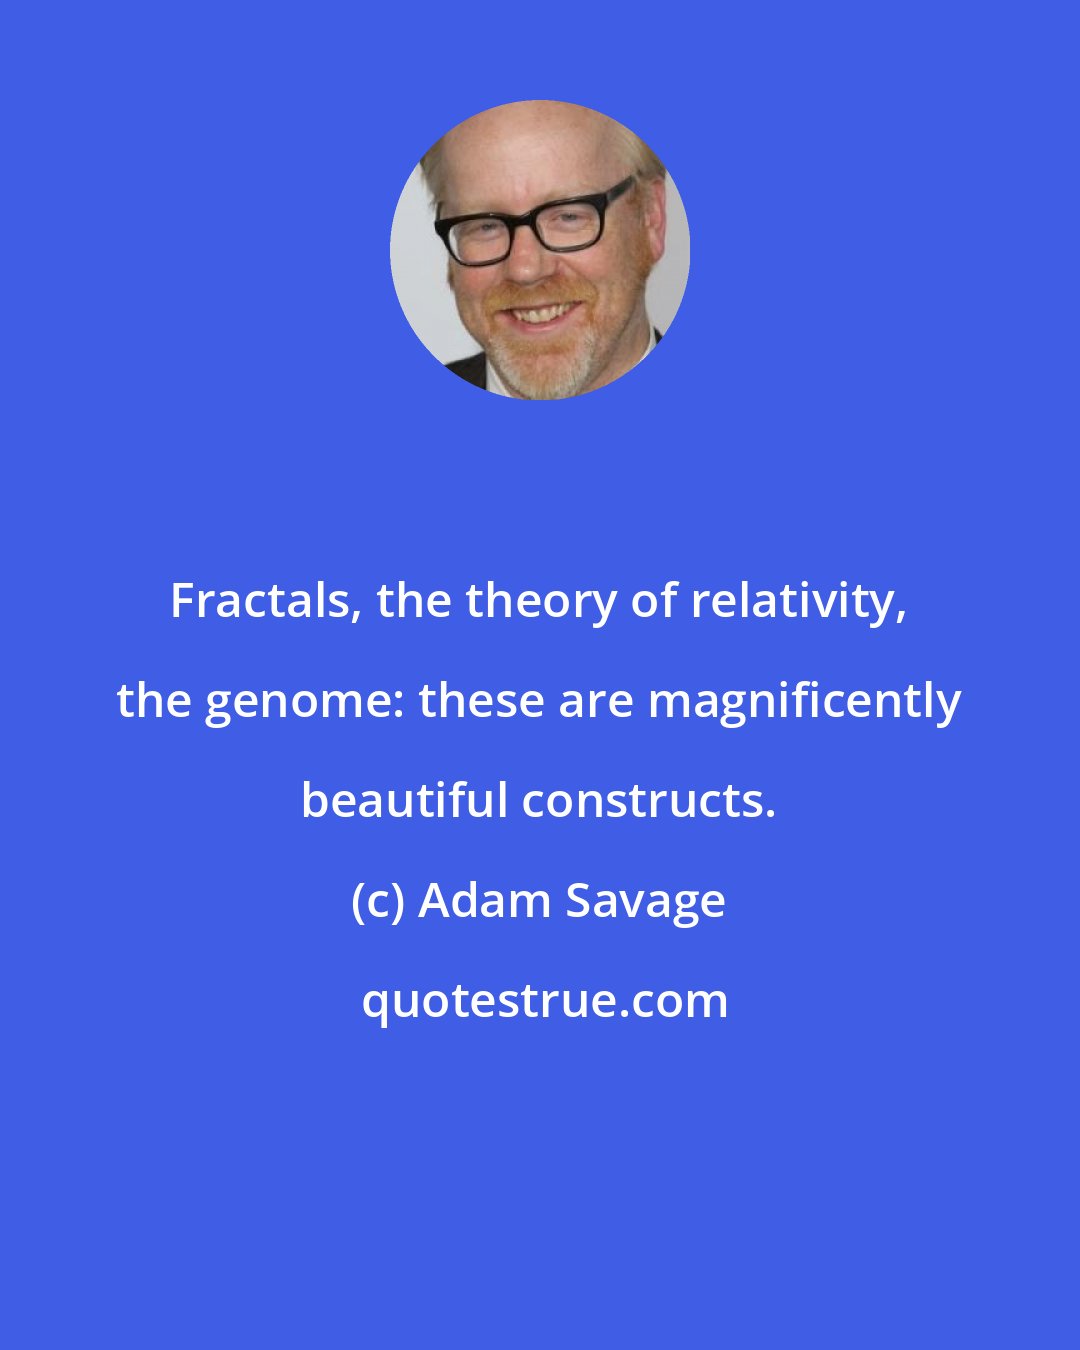 Adam Savage: Fractals, the theory of relativity, the genome: these are magnificently beautiful constructs.